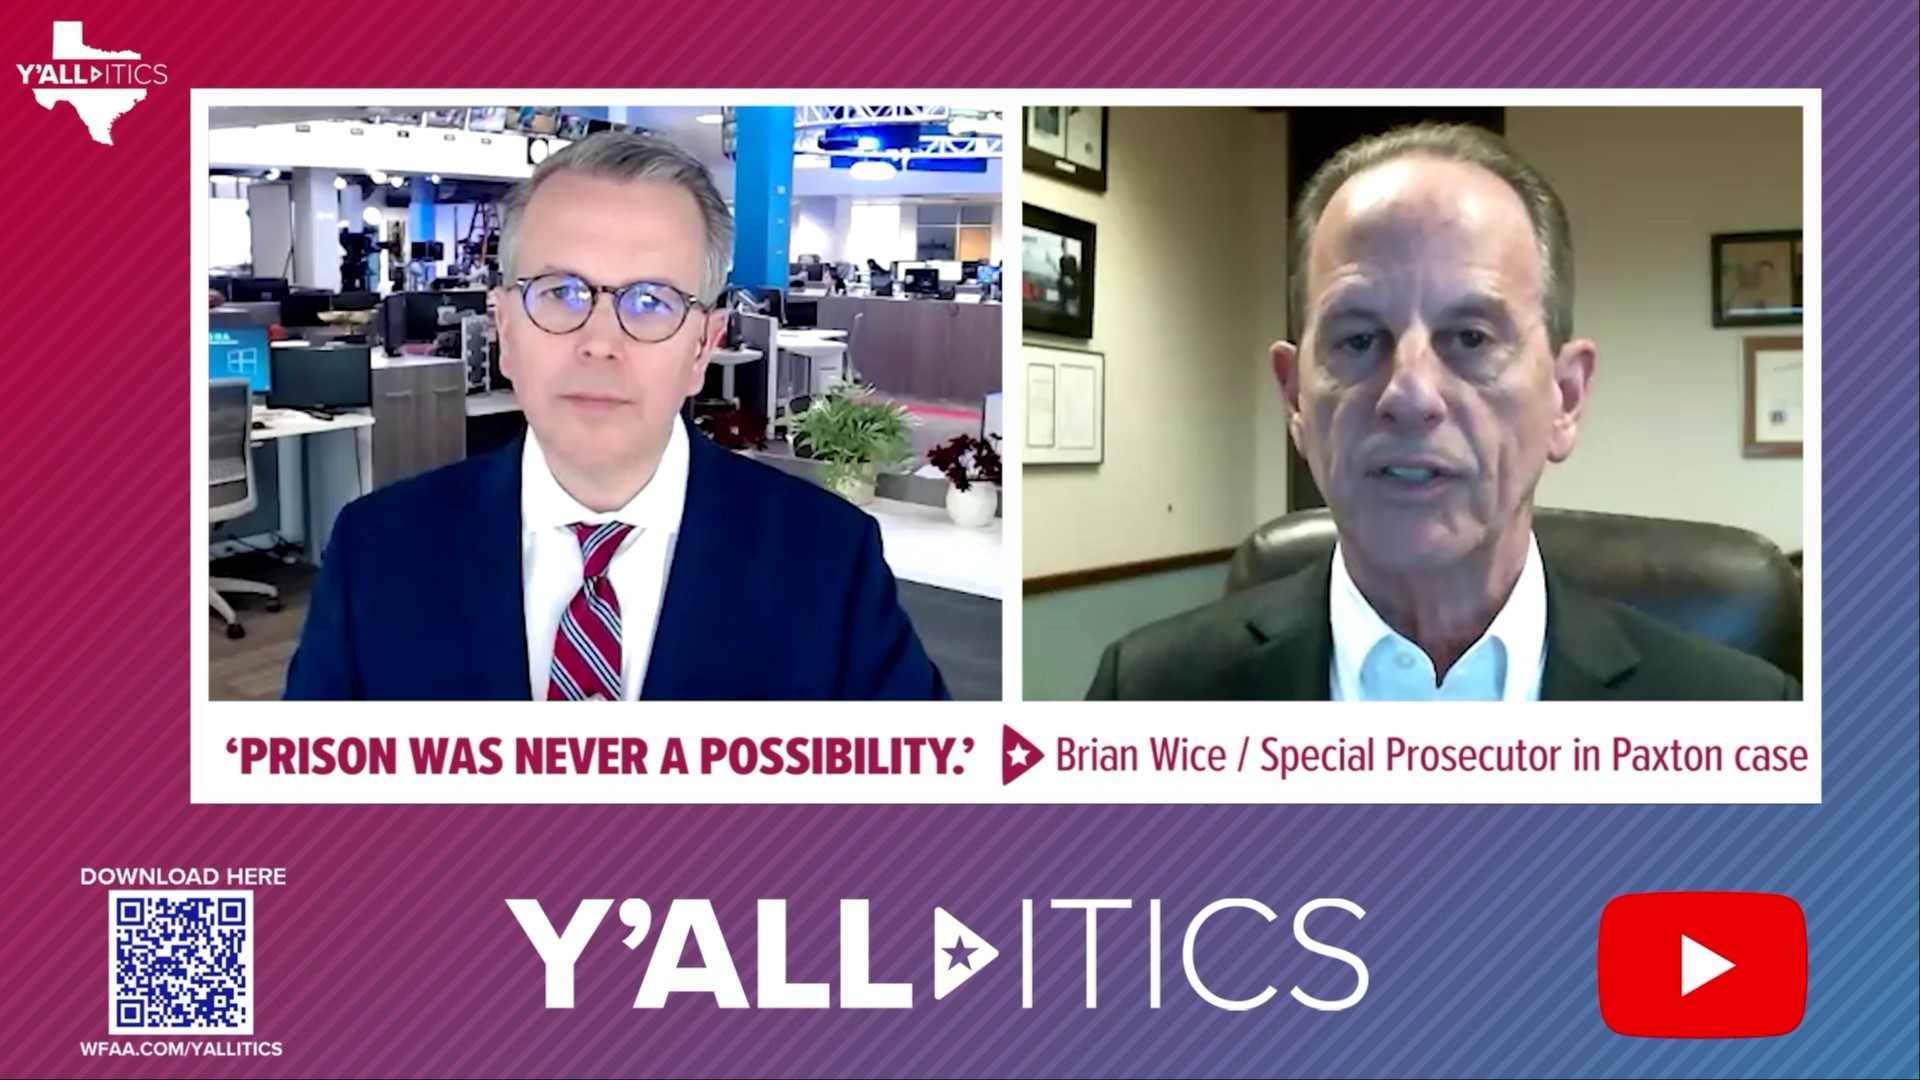 Brian Wice made the decision to make a deal, and he took our call from his Houston office in this special episode of Y’all-itics.